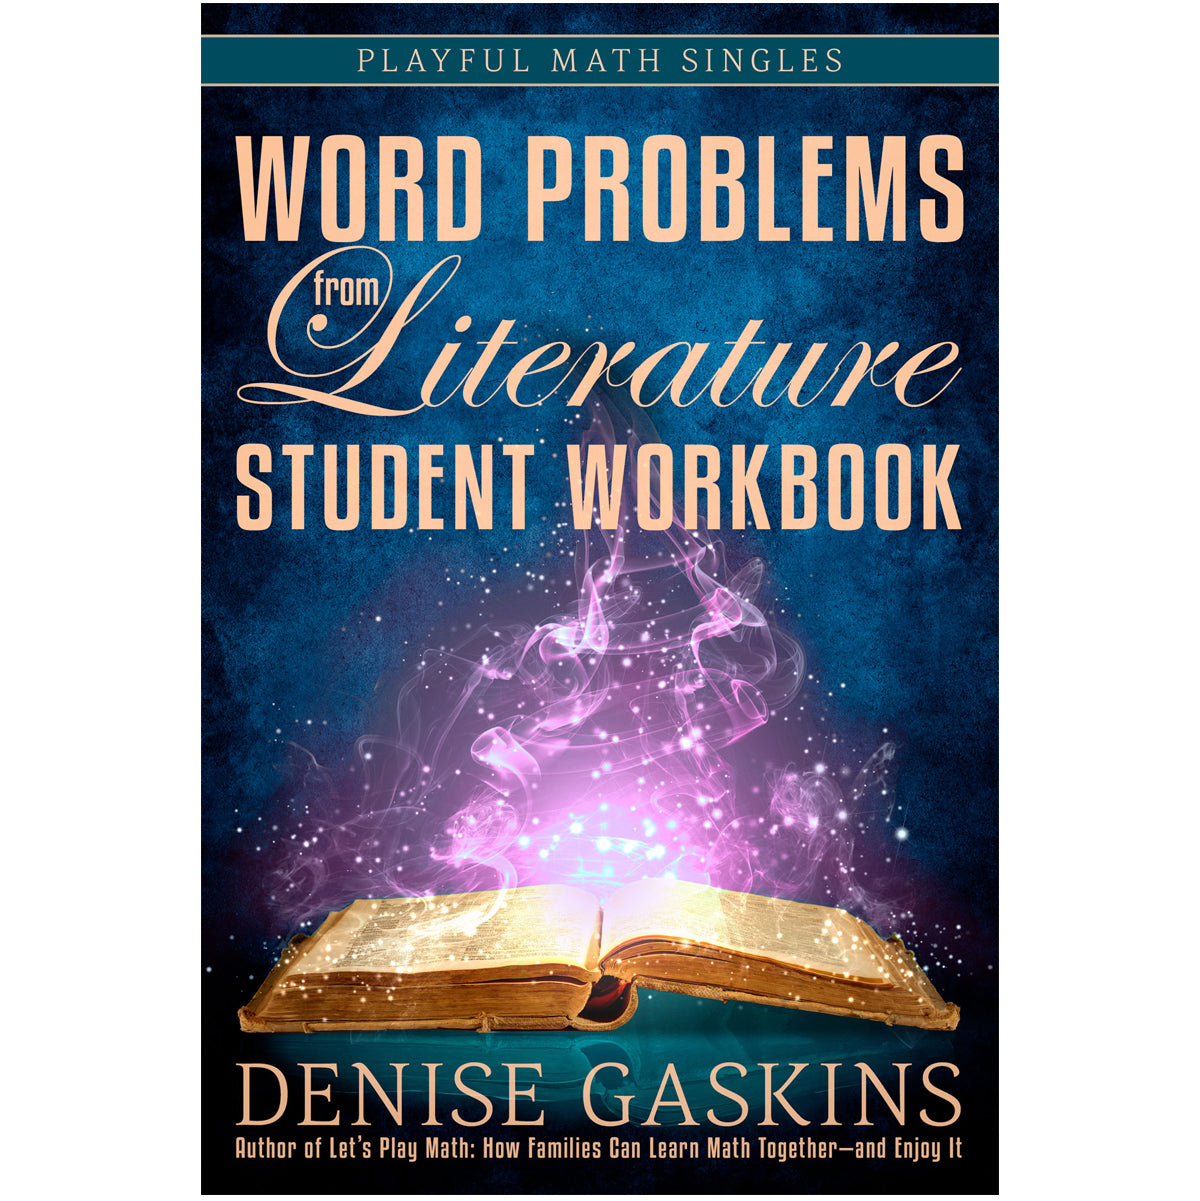 Word Problems from Literature student workbook paperback by Denise Gaskins